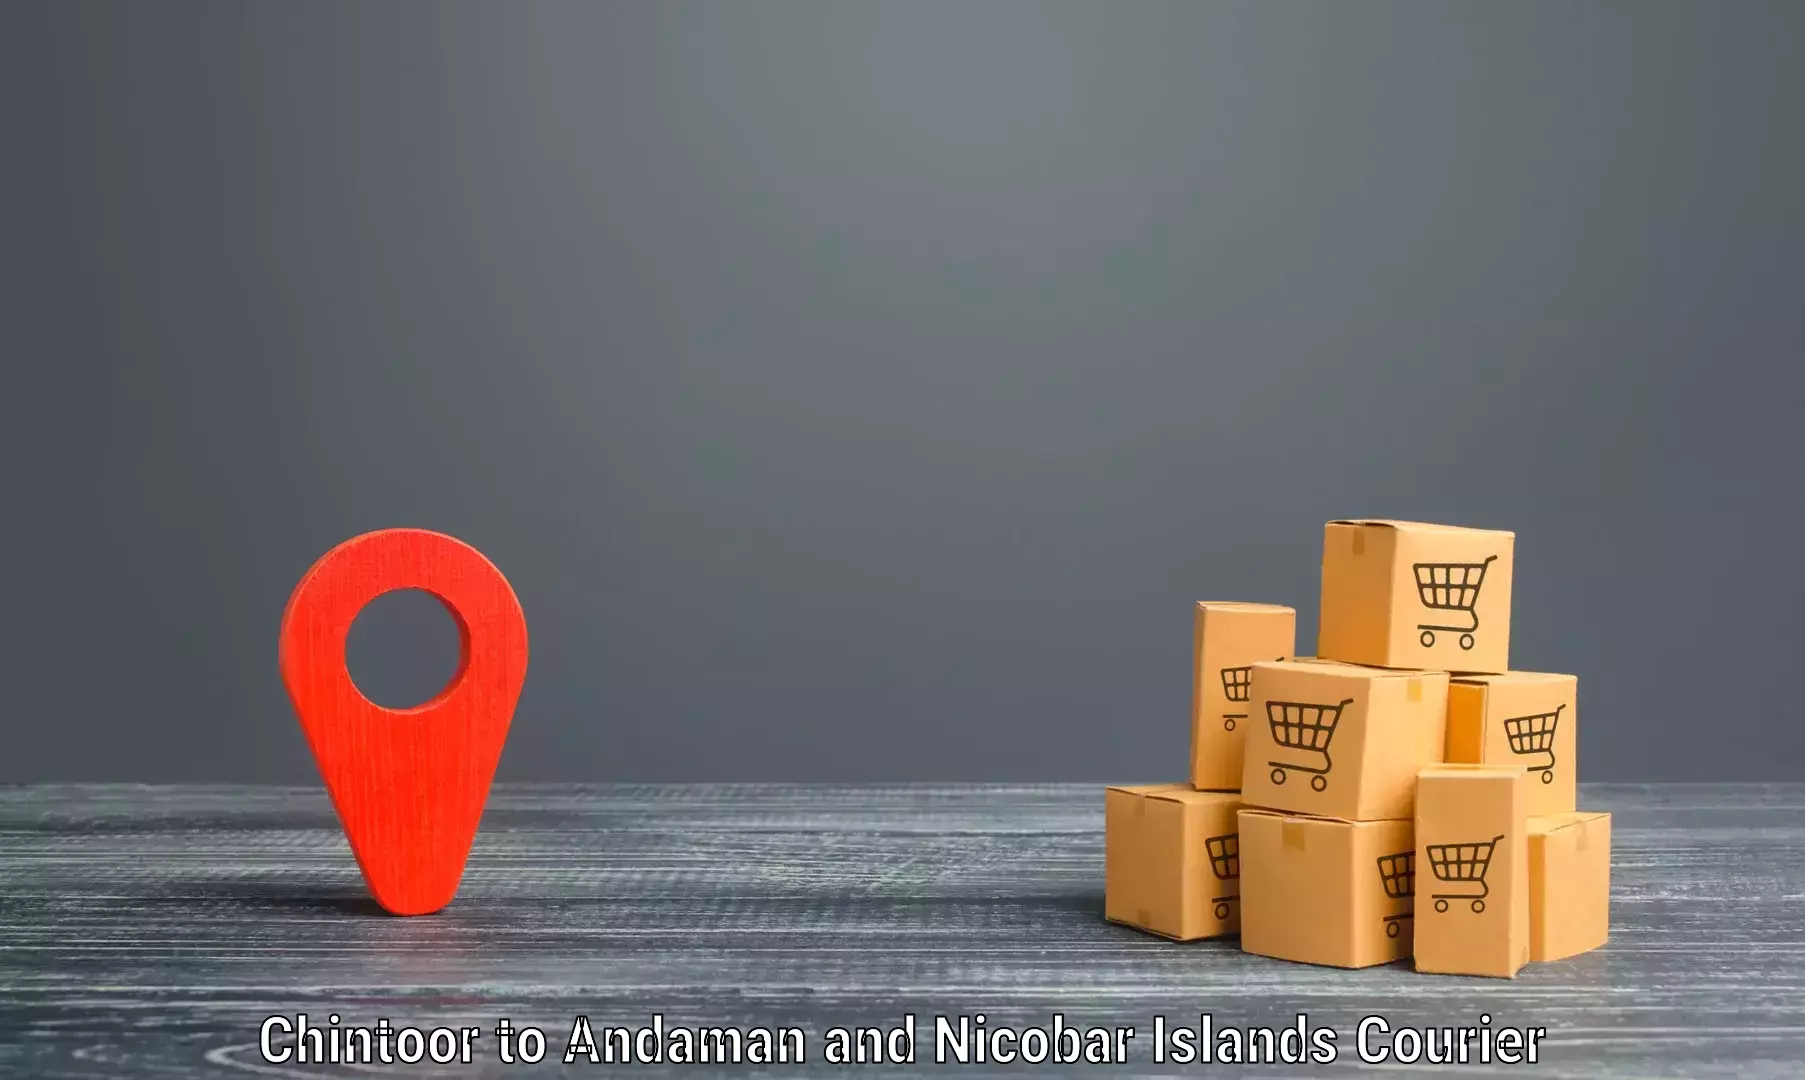 Express delivery network Chintoor to Andaman and Nicobar Islands